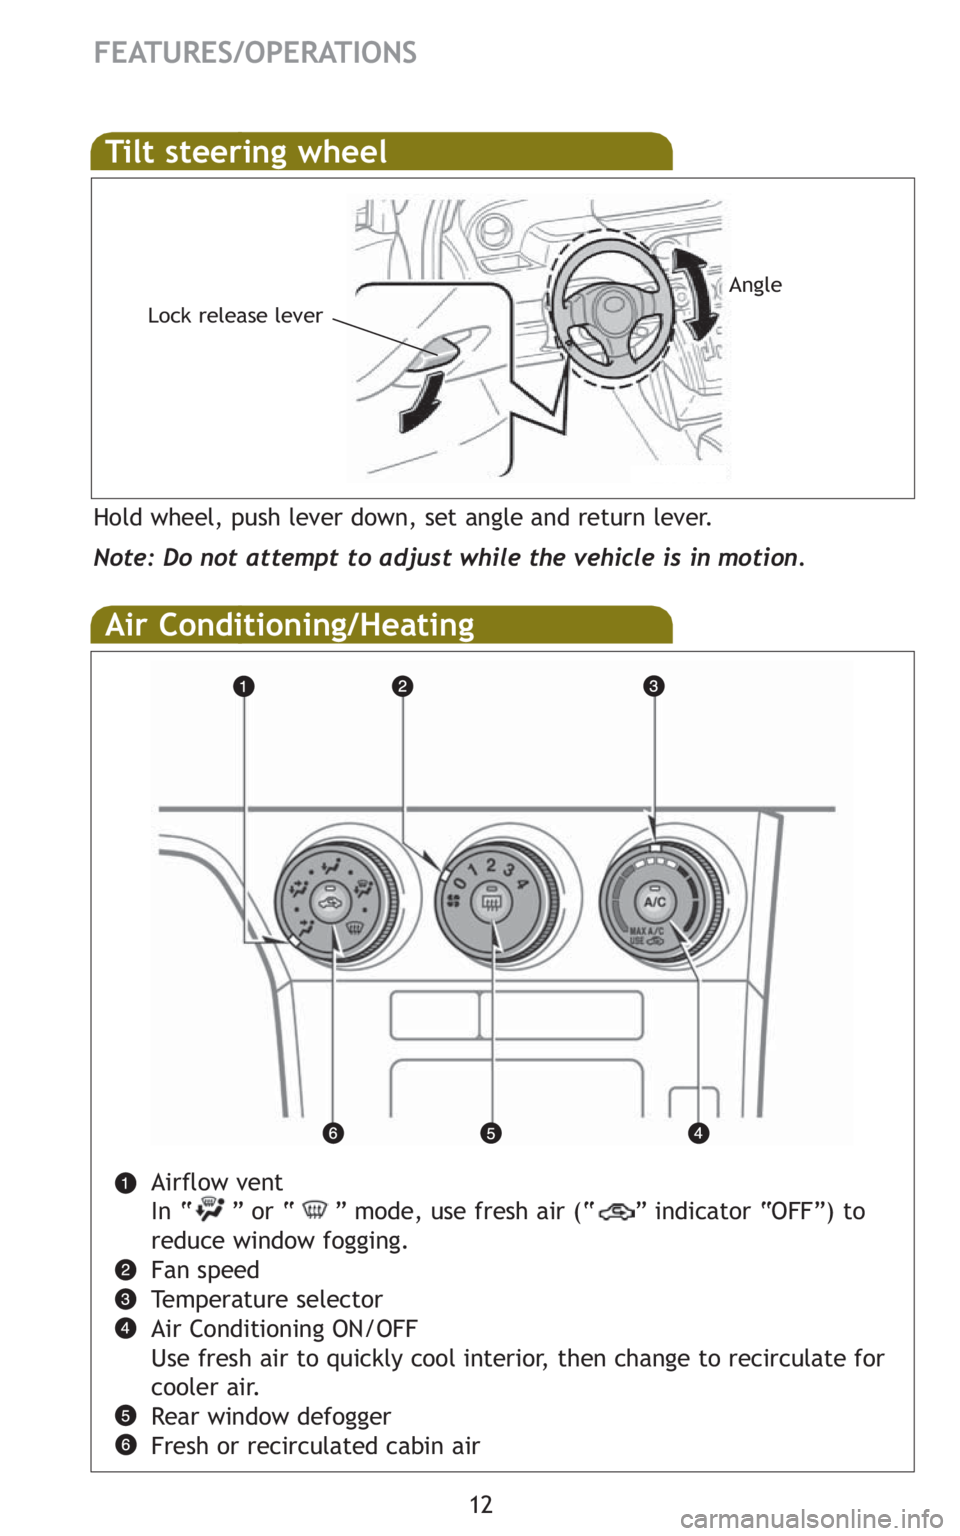 TOYOTA xB 2010  Owners Manual (in English) 12
FEATURES/OPERATIONS
Air Conditioning/Heating
Airflow vent
In “     ” or “     ” mode, use fresh air (“     ” indicator “OFF”) to
reduce window fogging.
Fan speed
Temperature selecto